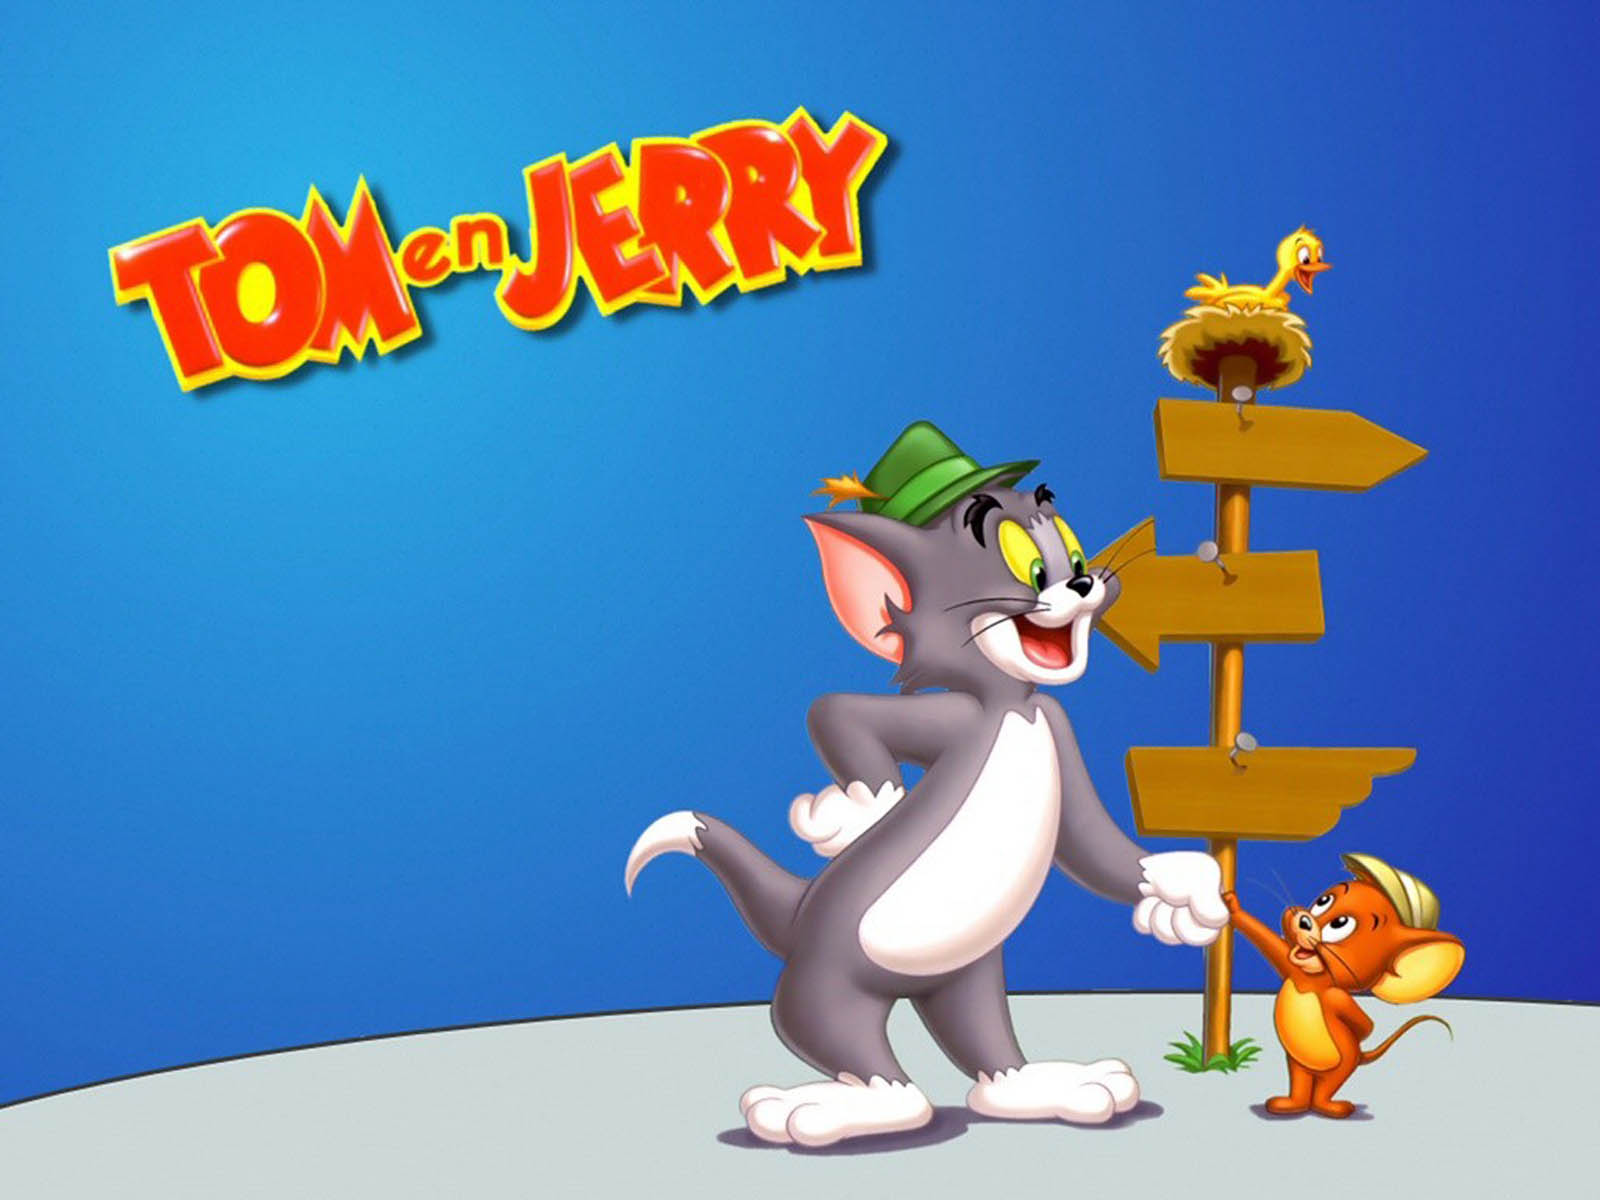 Tom and jerry wallpapers